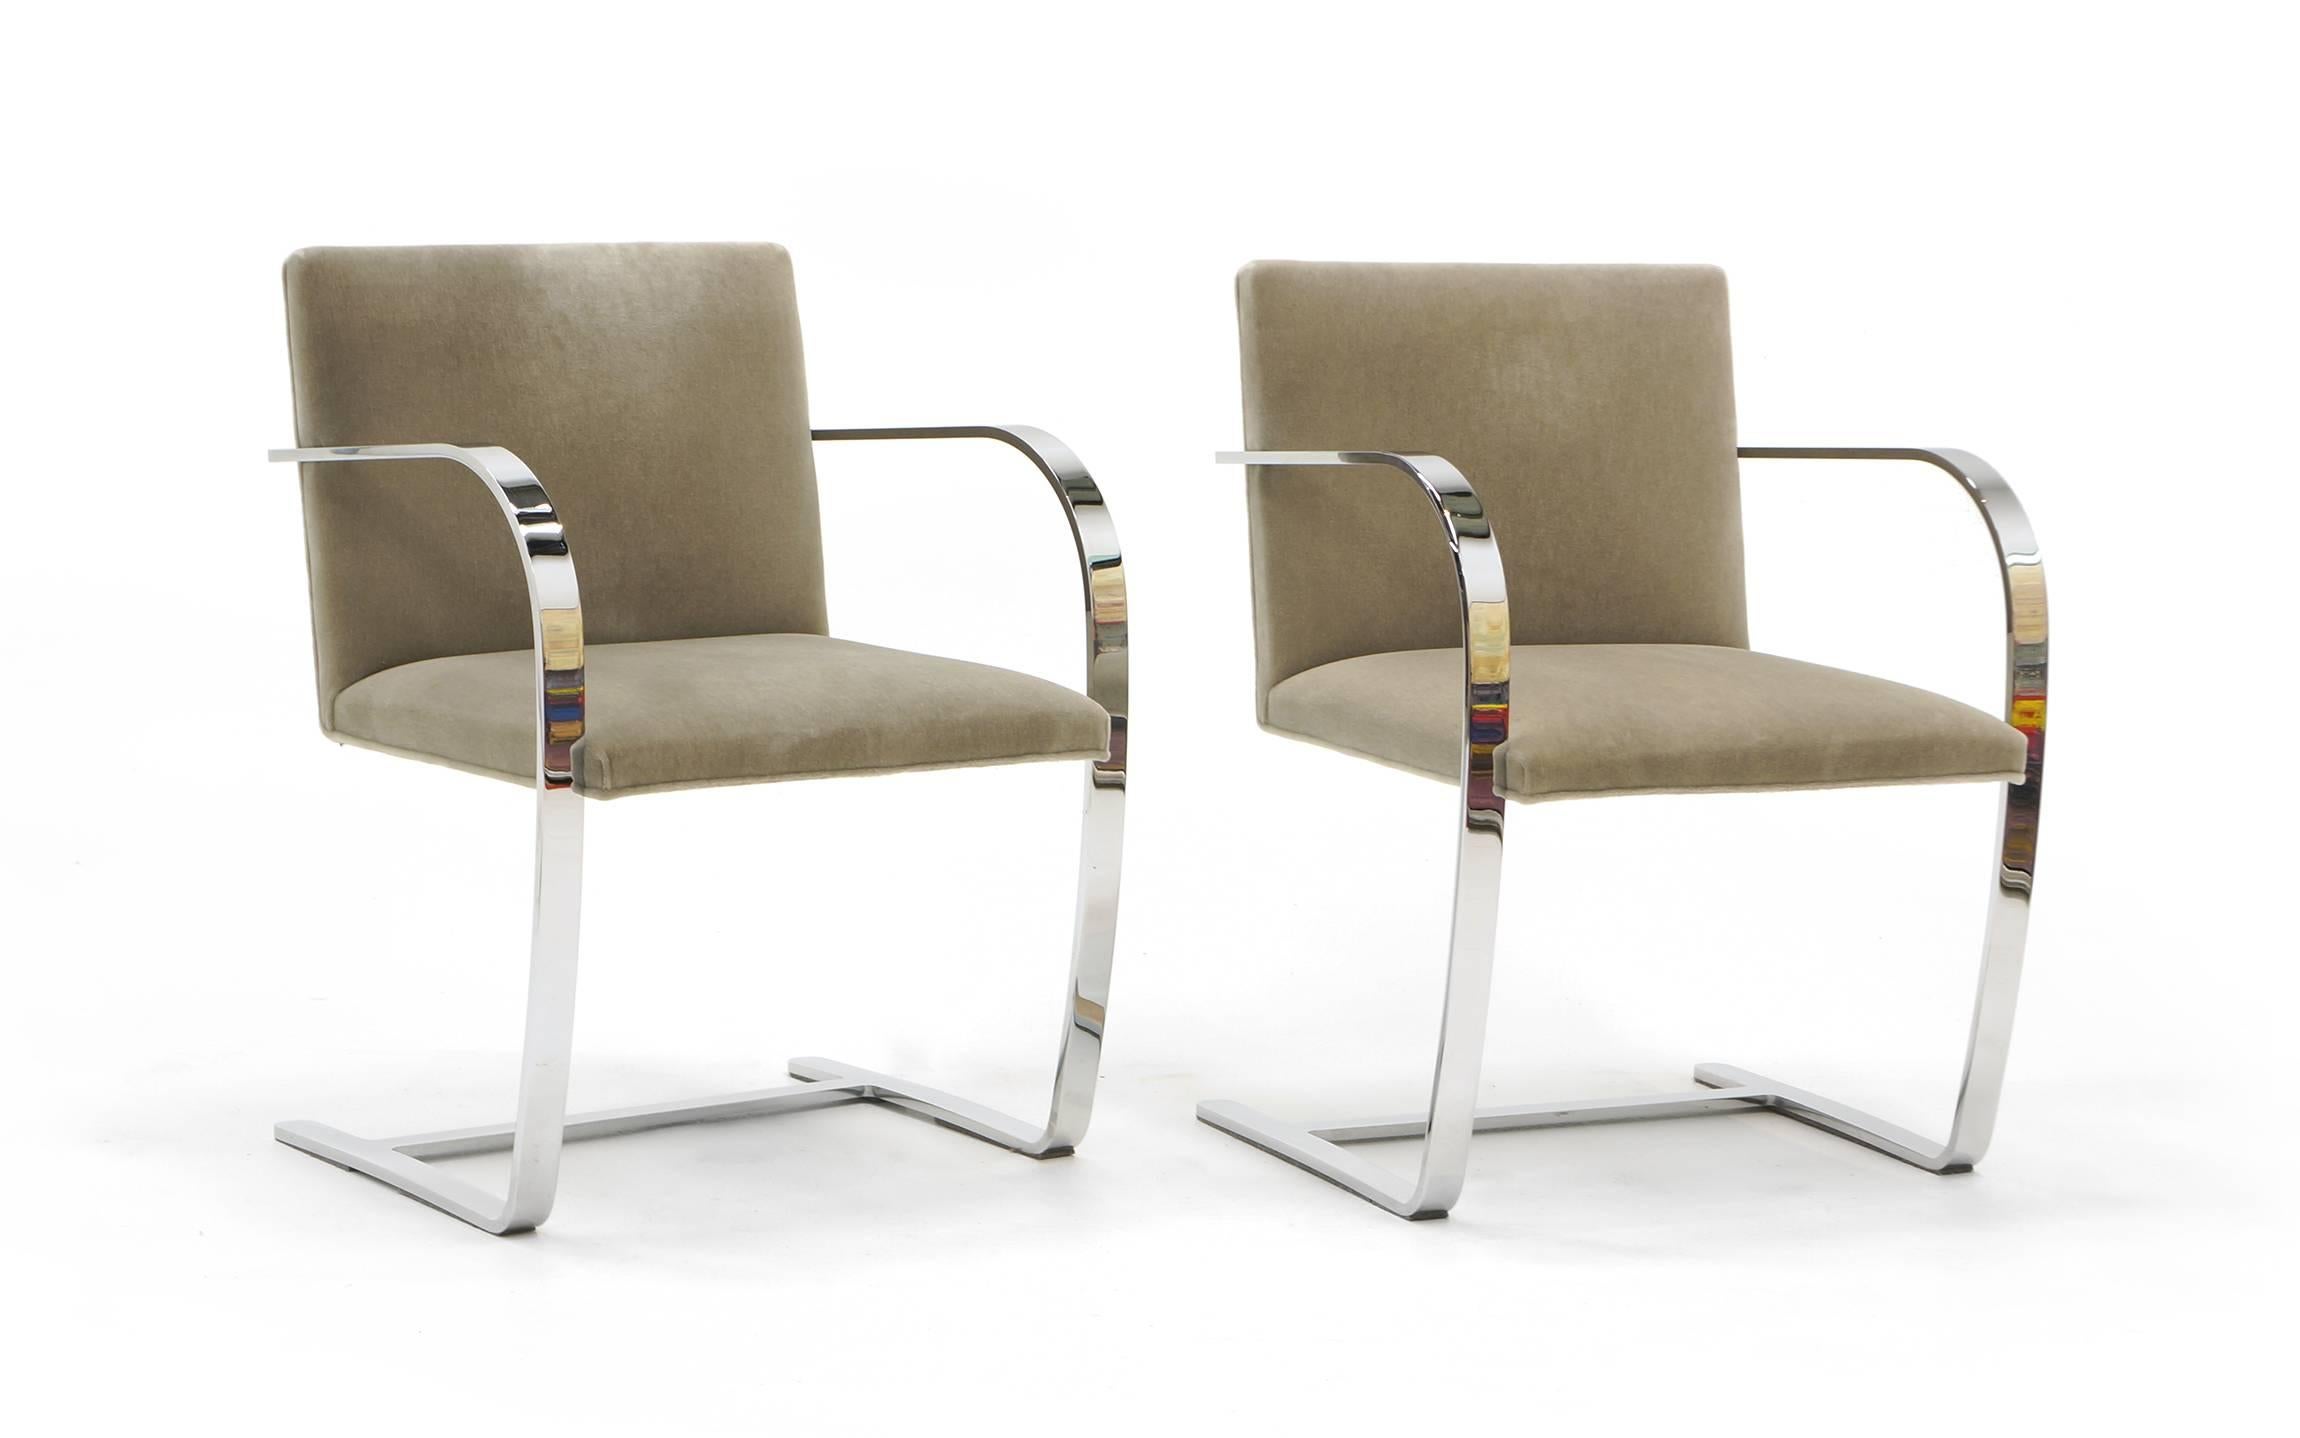 Brno chairs designed by Mies van der Rohe. Two chairs available. These are the original authorized Knoll production in triple chrome-plated to a mirror finish bar stock steel and original Knoll felt/velvet fabric. These make great dining chairs or